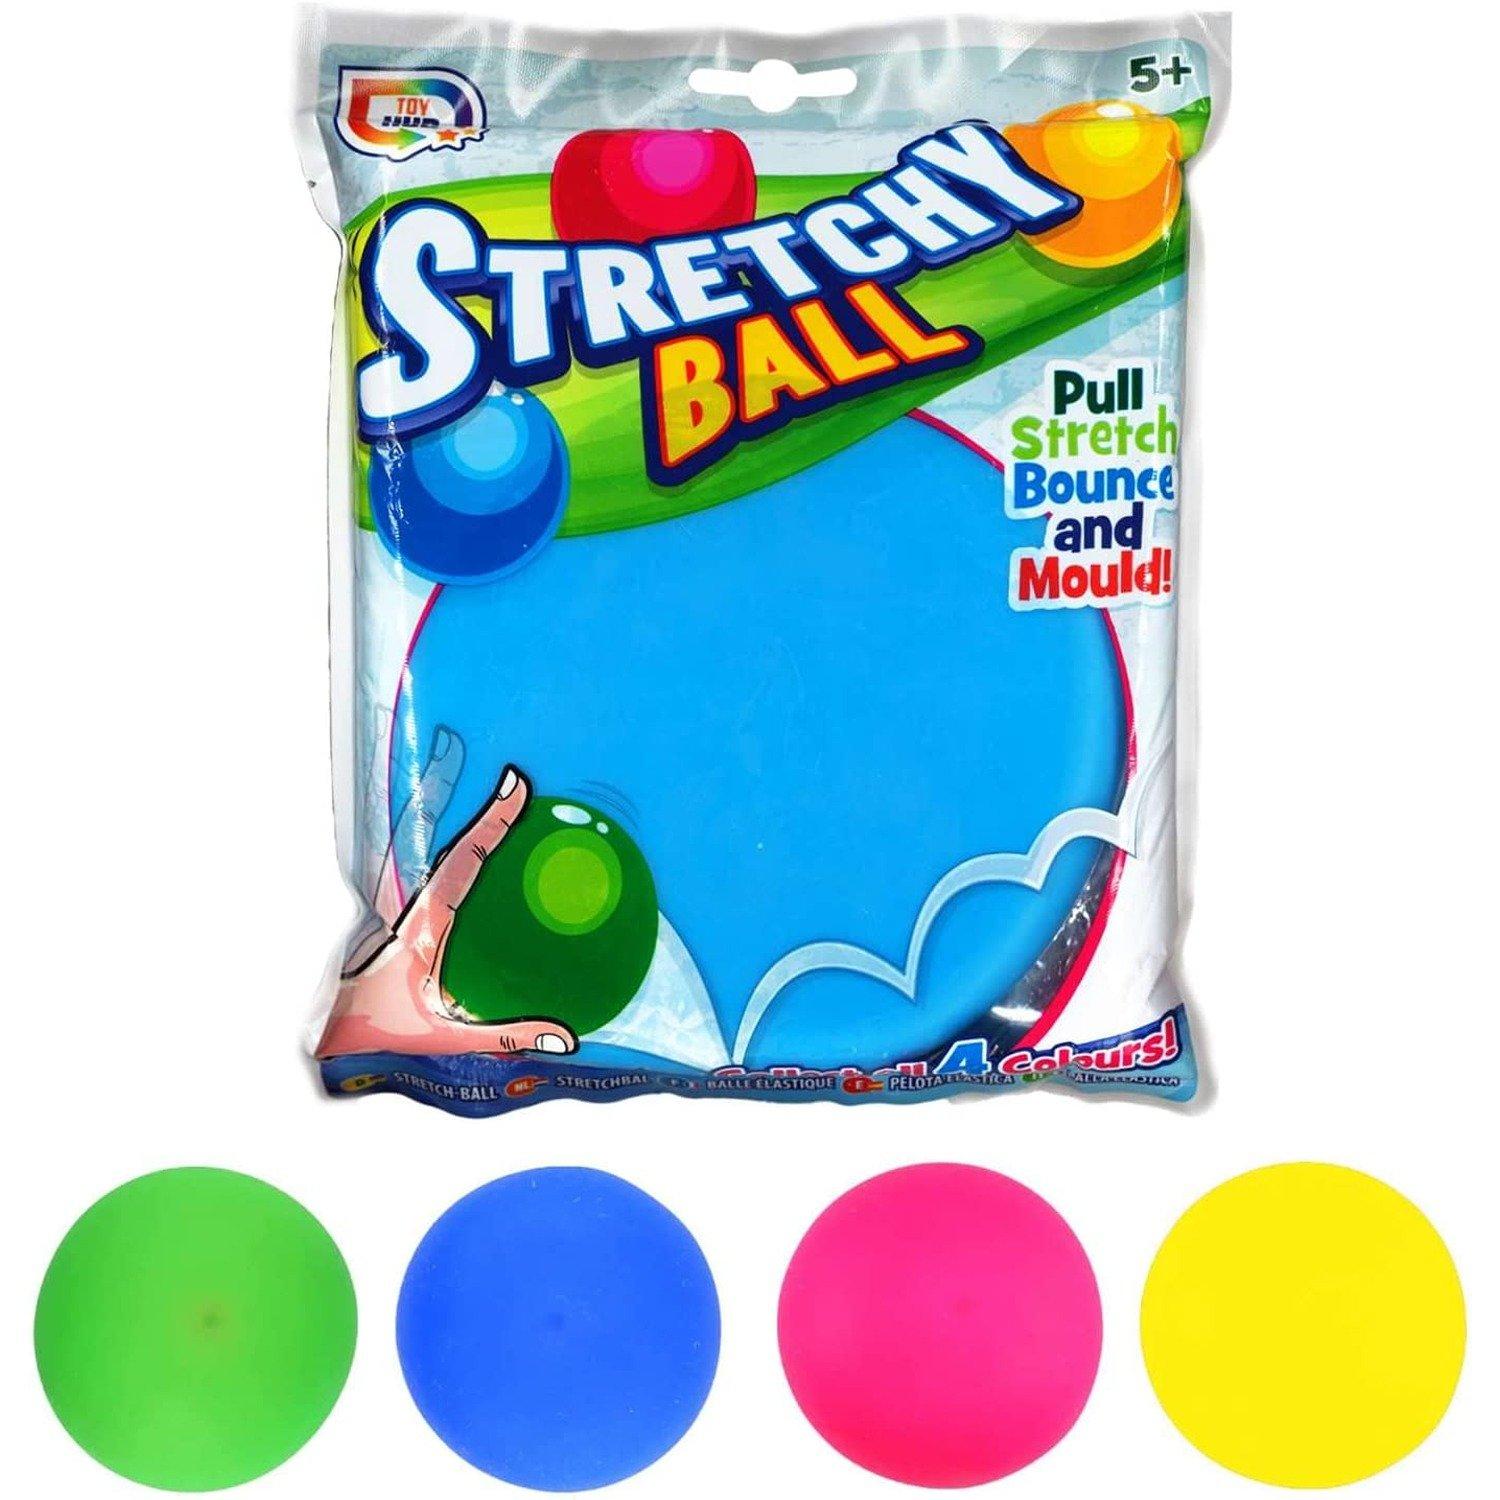 Stretchy Ball (One Supplied)